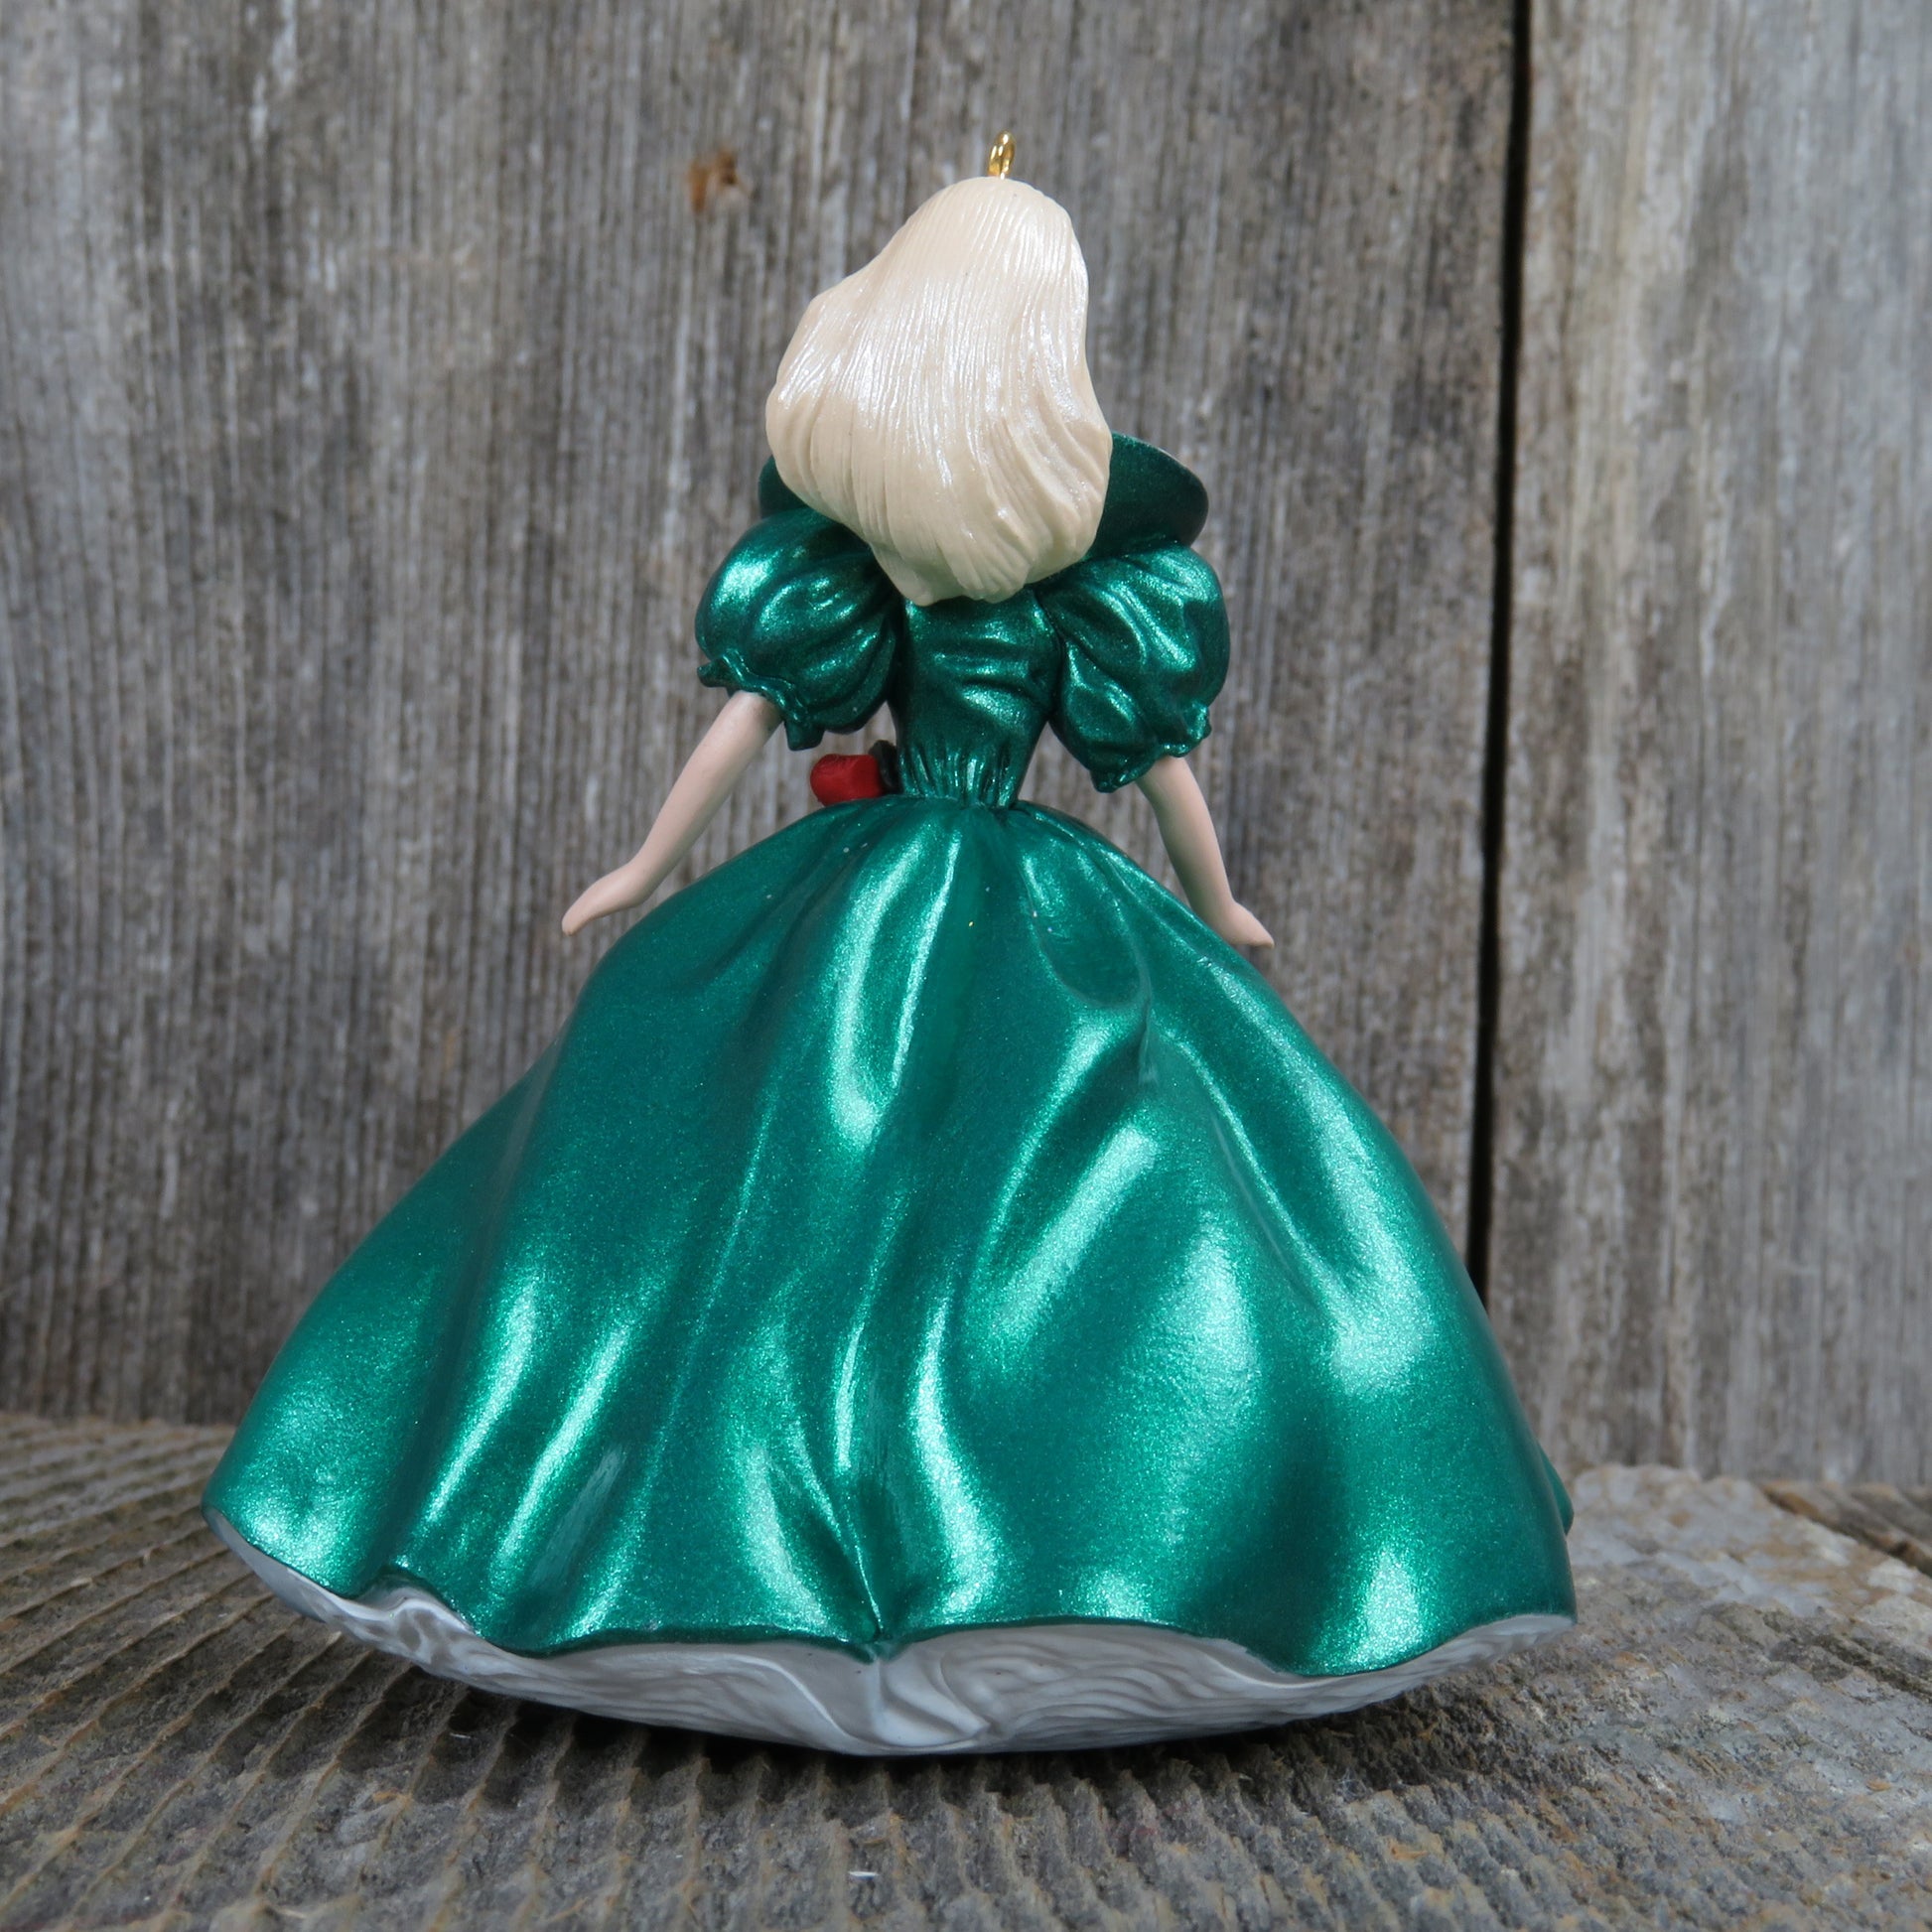 Vintage Holiday Barbie Hallmark Ornament 1995 Green Dress and Blonde Hair Christmas Collector's Series - At Grandma's Table